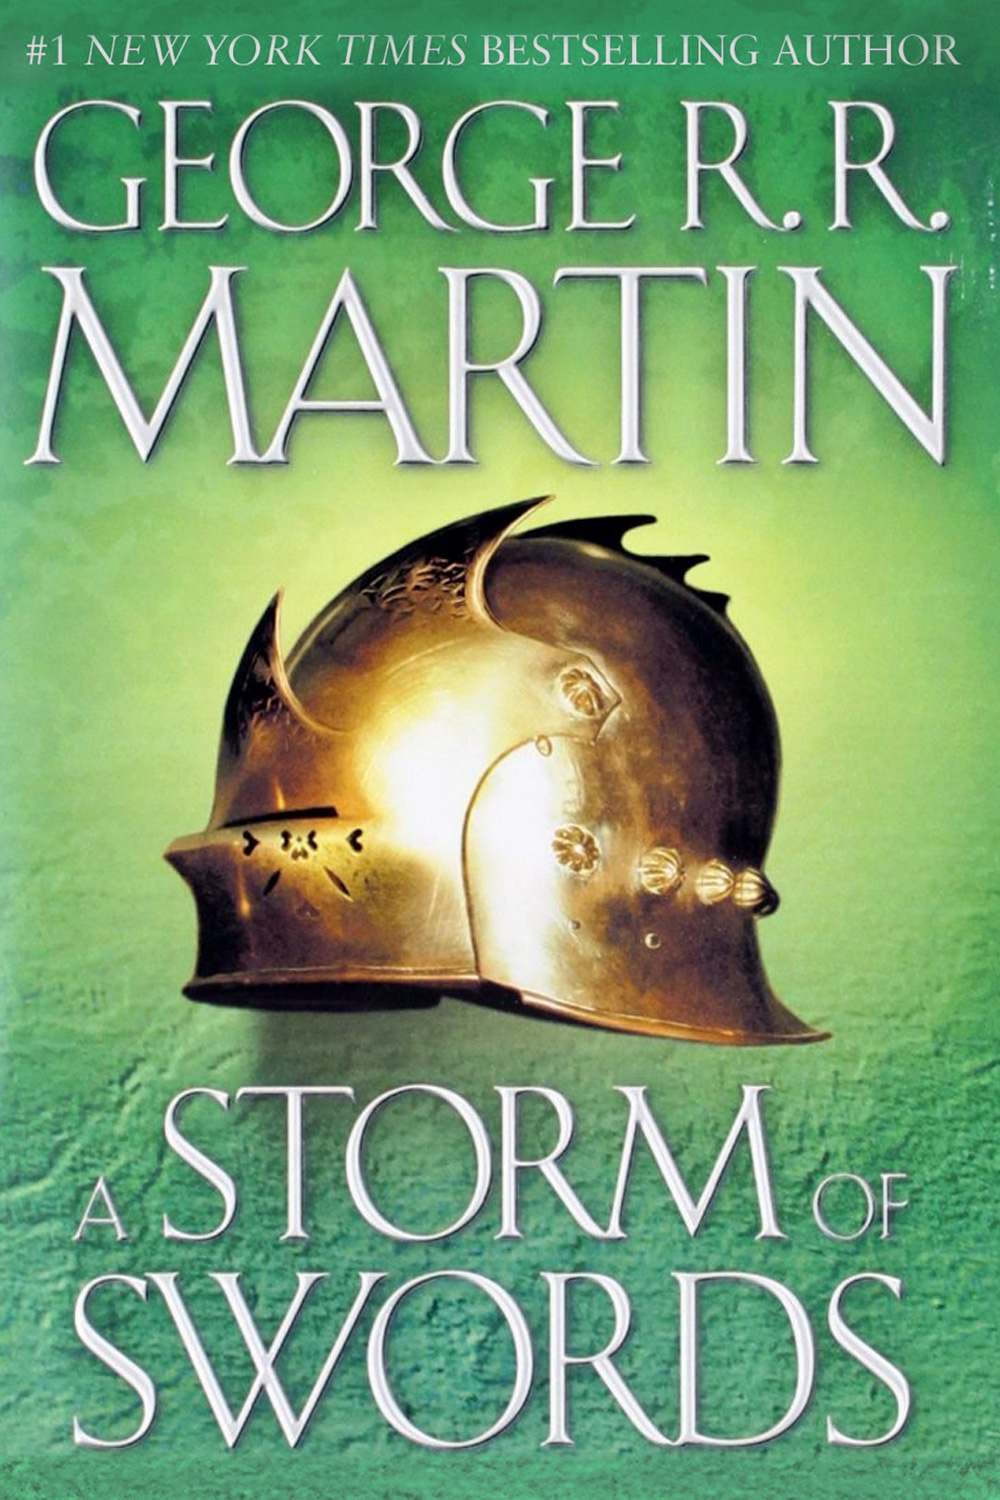 A Storm of Swords by George R.R. Martin